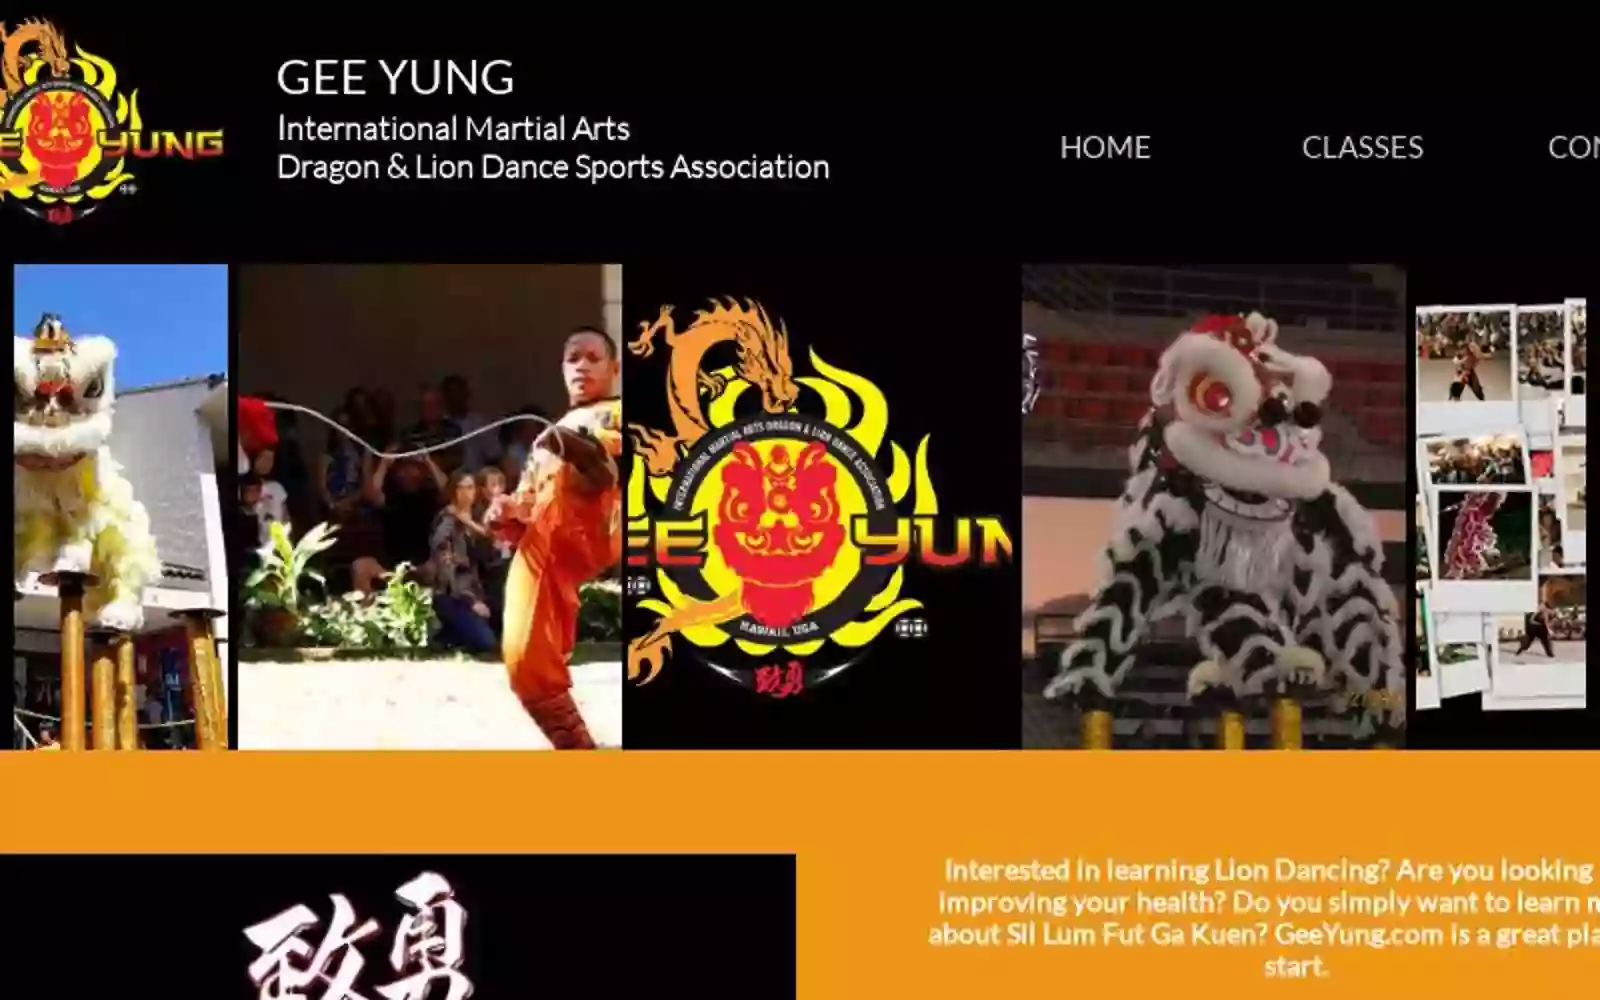 Gee Yung Chinese Martial Arts, Dragon & Lion Dance Sports Association